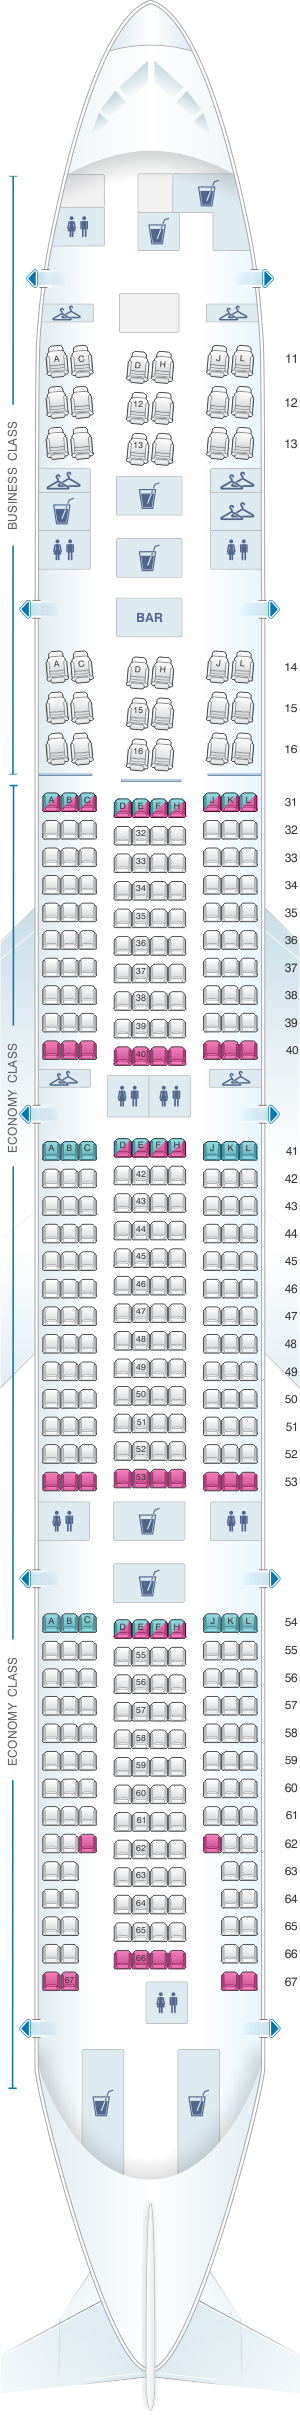 Seat map for Air China Boeing B777 300ER (392PAX)